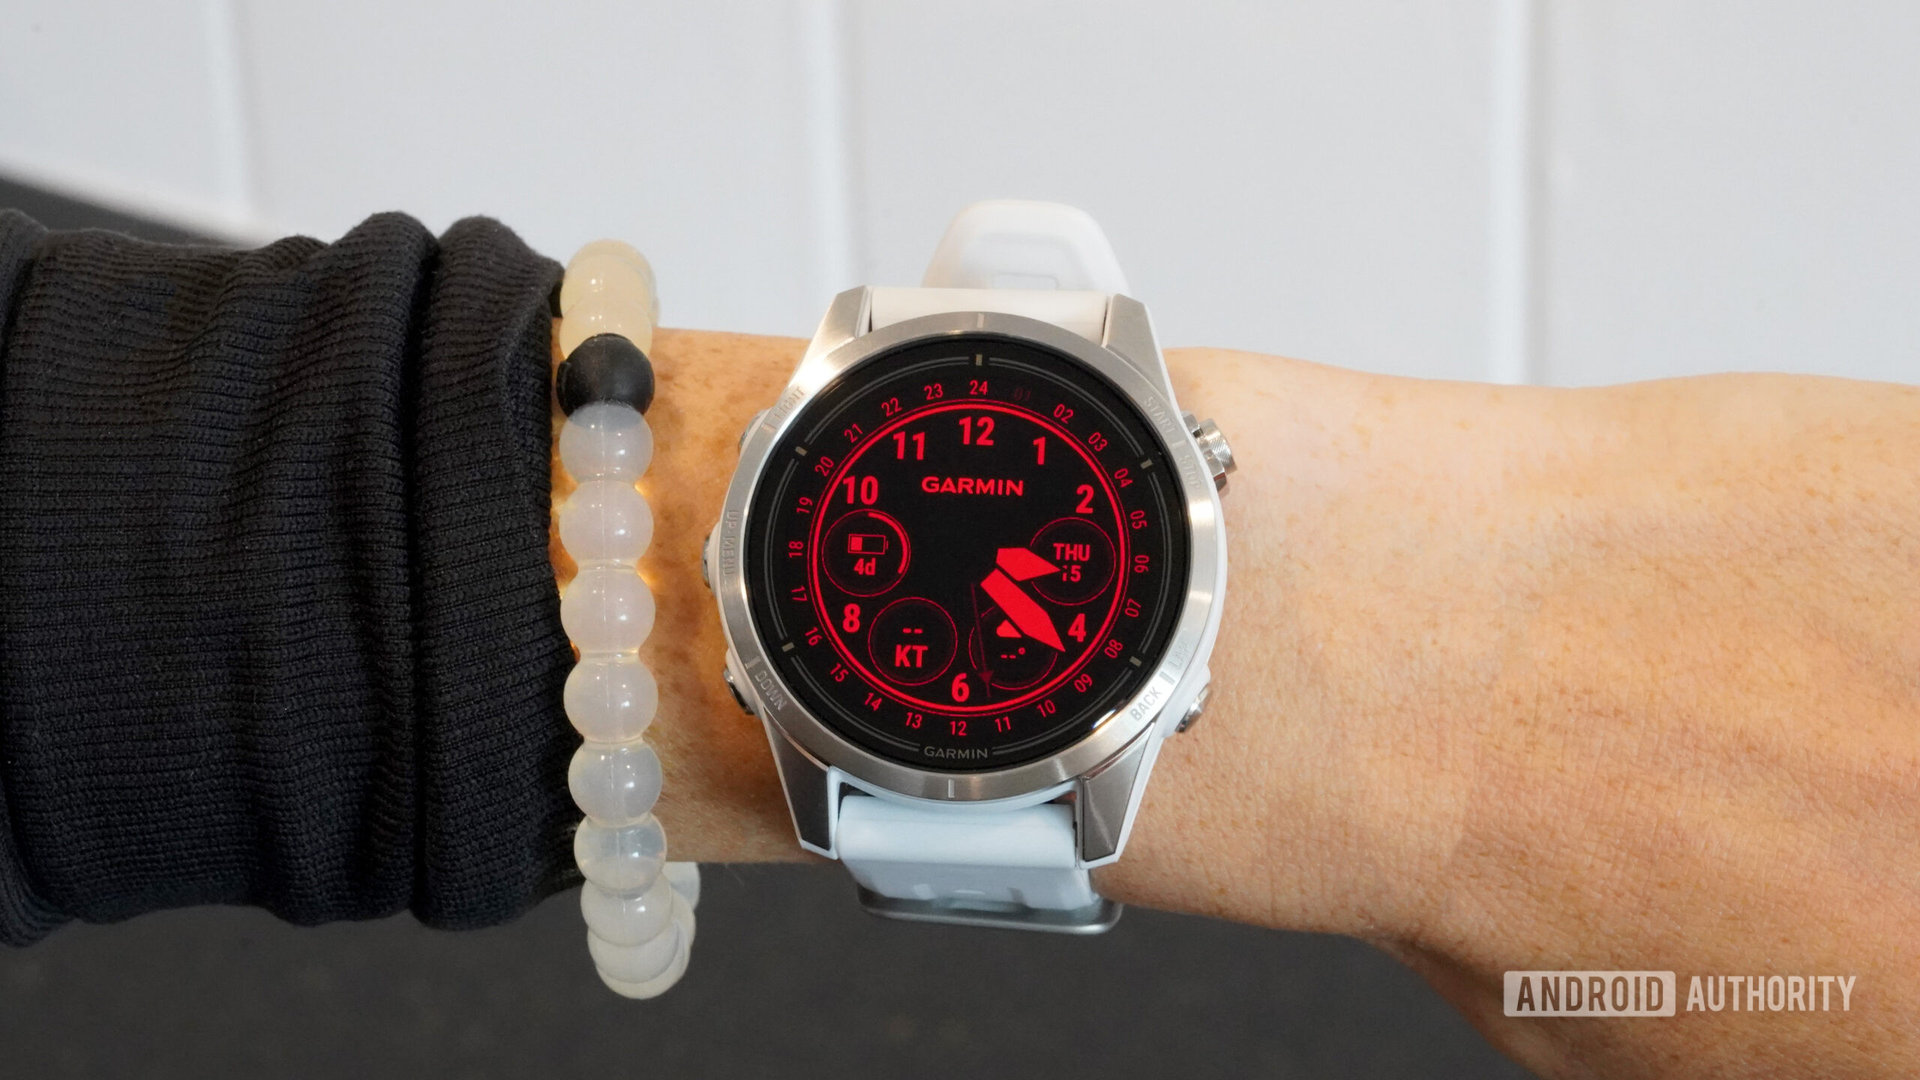 A watch face in red shift mode utilizes only red hues.